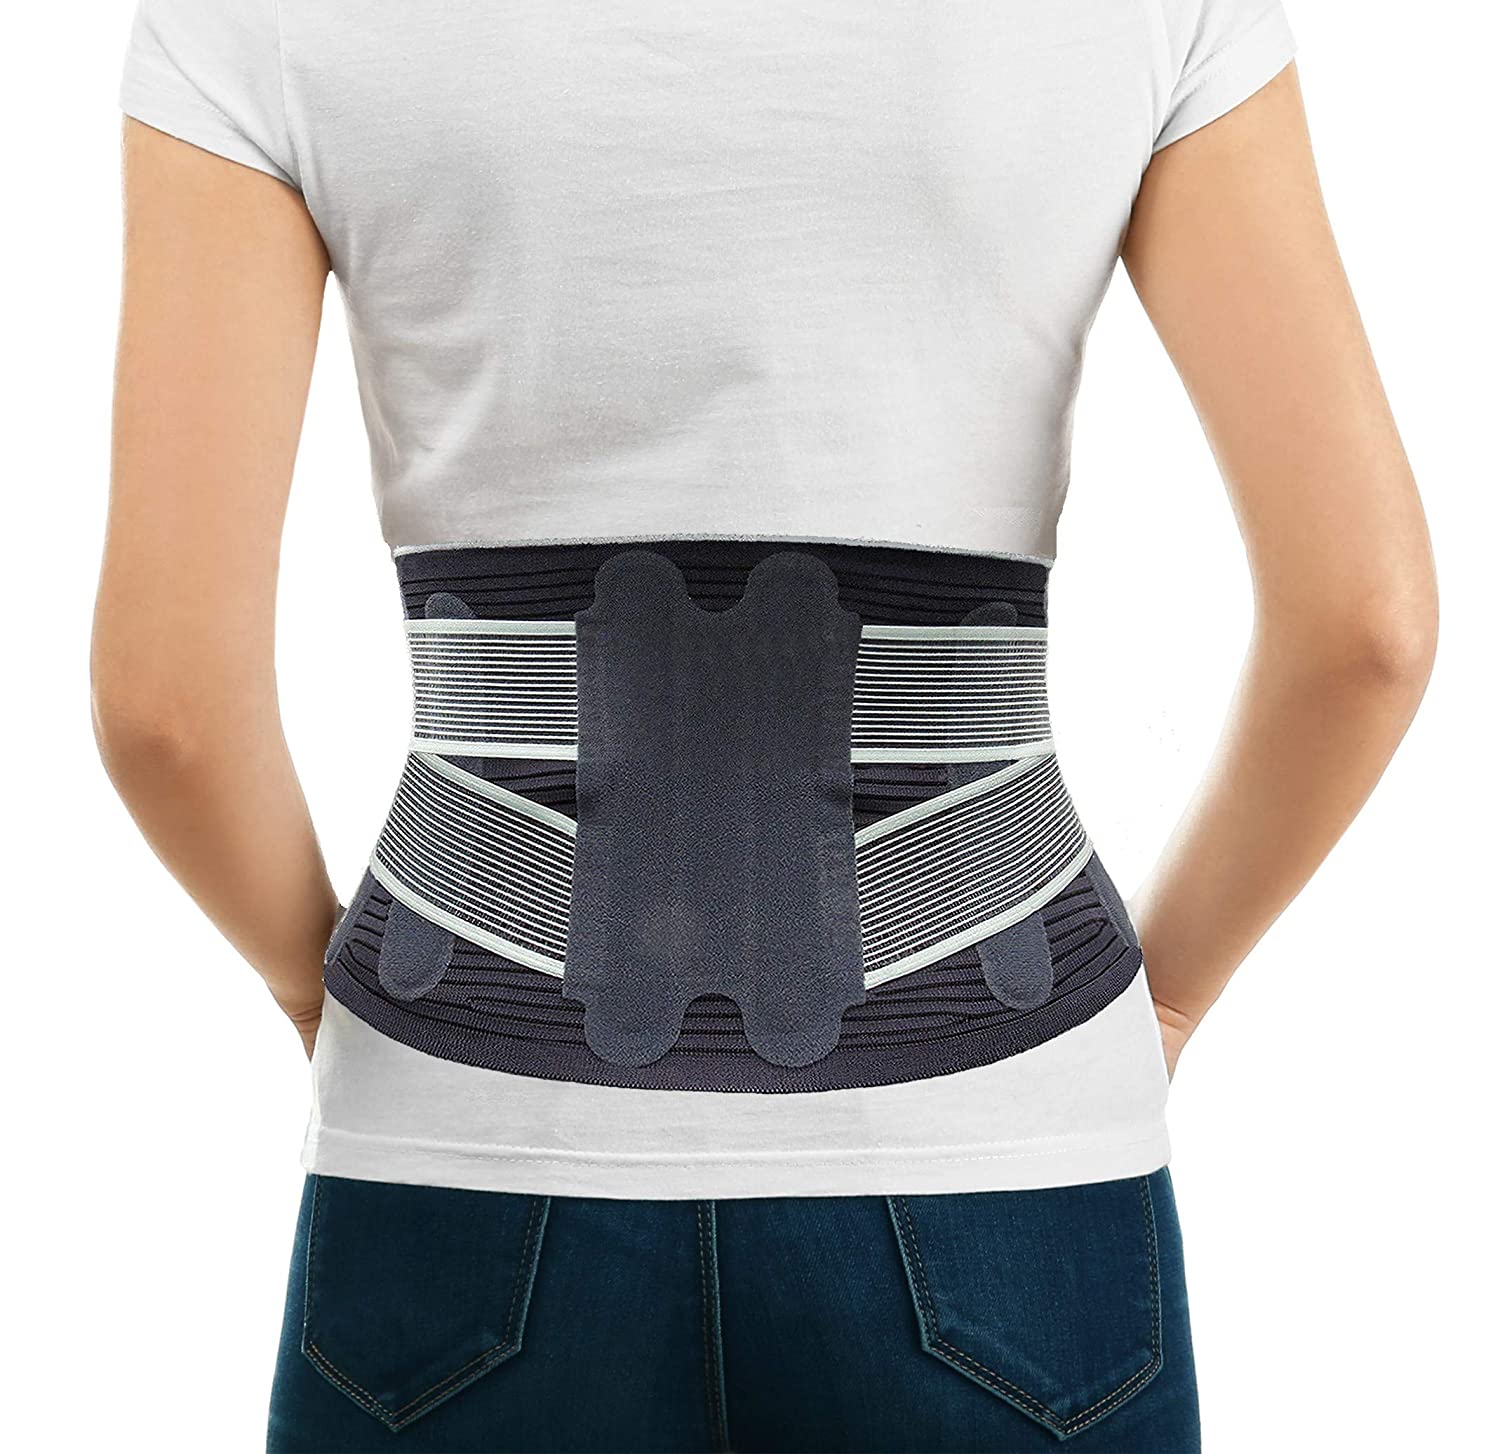 Back Brace for Lower Back Pain, Self-heating Back Support Belt with 4  Stays, Adjustable Waist Strap Man & Woman Lumbar Support Brace to Relief